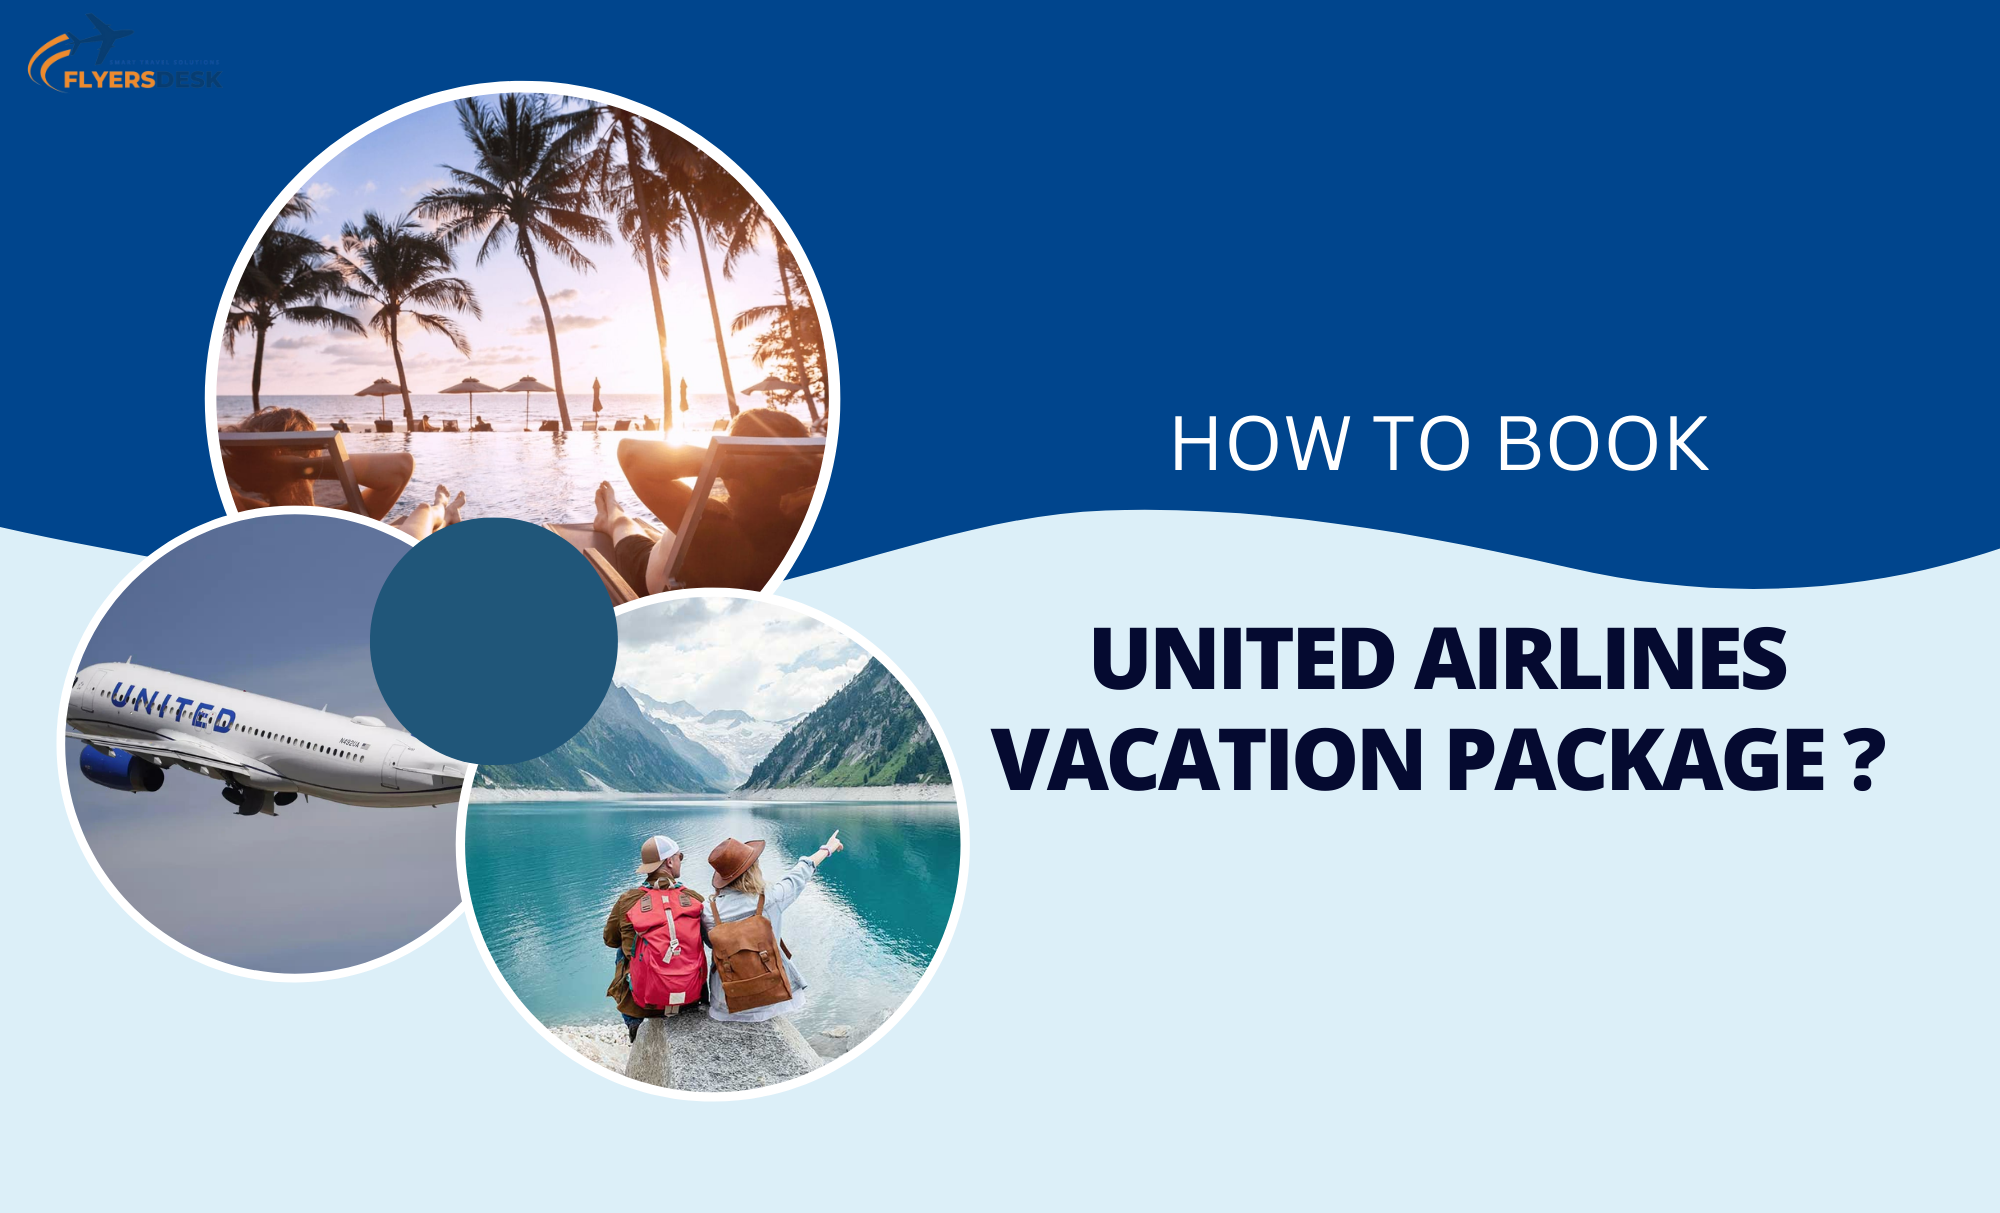 how to book united vacation package